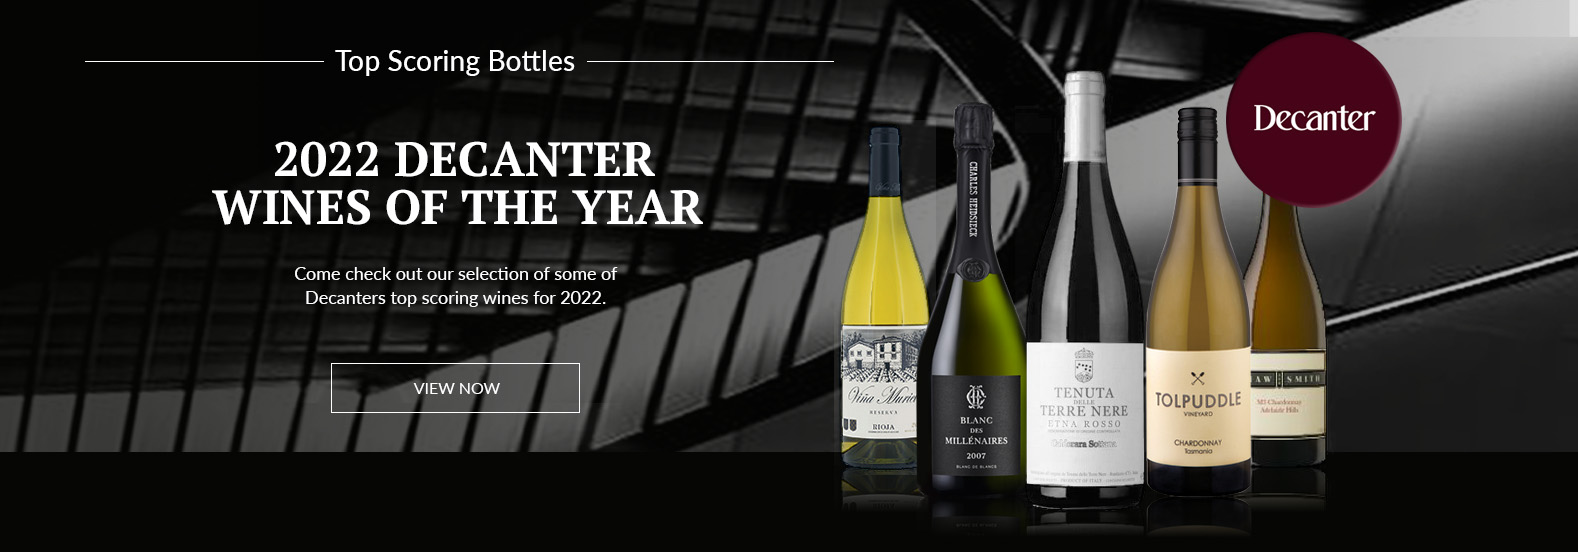 Decanter Wines Of The Year 2022 - Our Top Scoring Bottles